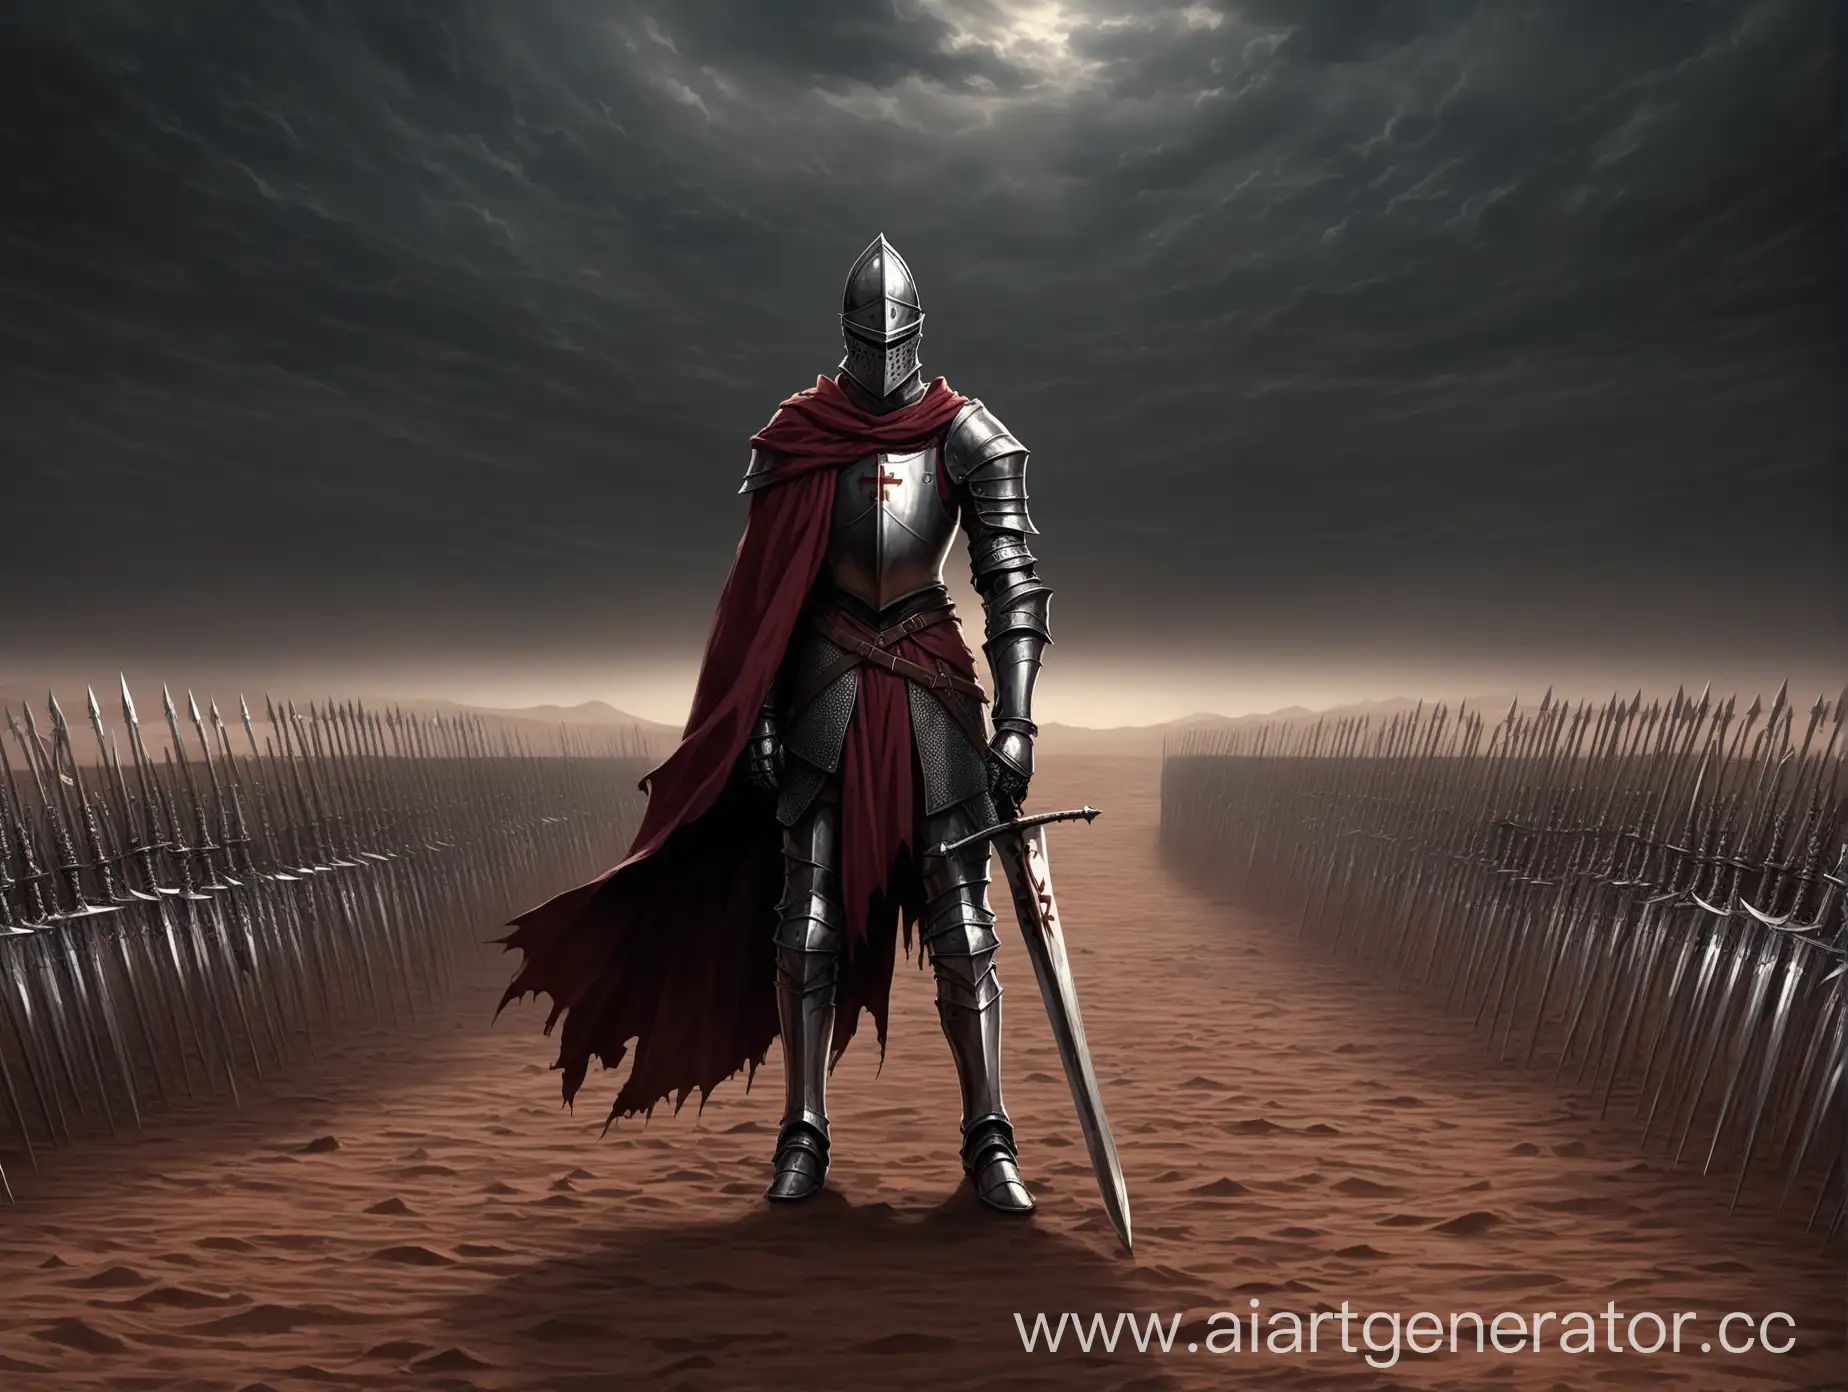 Man, skinny, tired, warrior, knight, spear, full height, grey armour, dark red short torn cloak, dark red surcoat, dark red cloth, black trousers, boots, gauntlets, armet helm, gun on his belt, small cross on the chest, pierced by arrows and blades, standing in a dark brown desert field of swords, swords around, dark brown cloudy sky